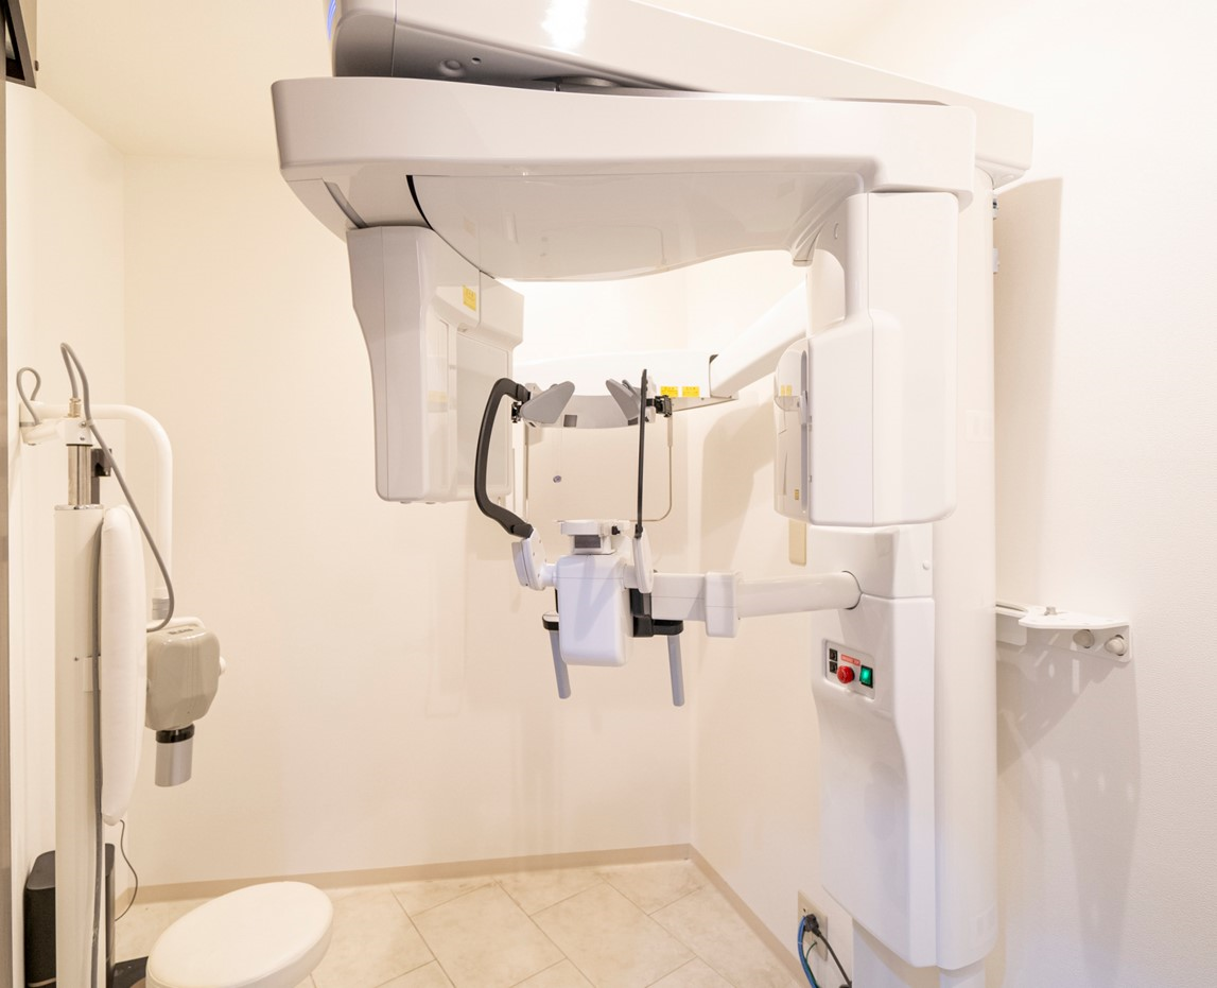 2. Dental CBCT (Cone Beam Computed Tomography)